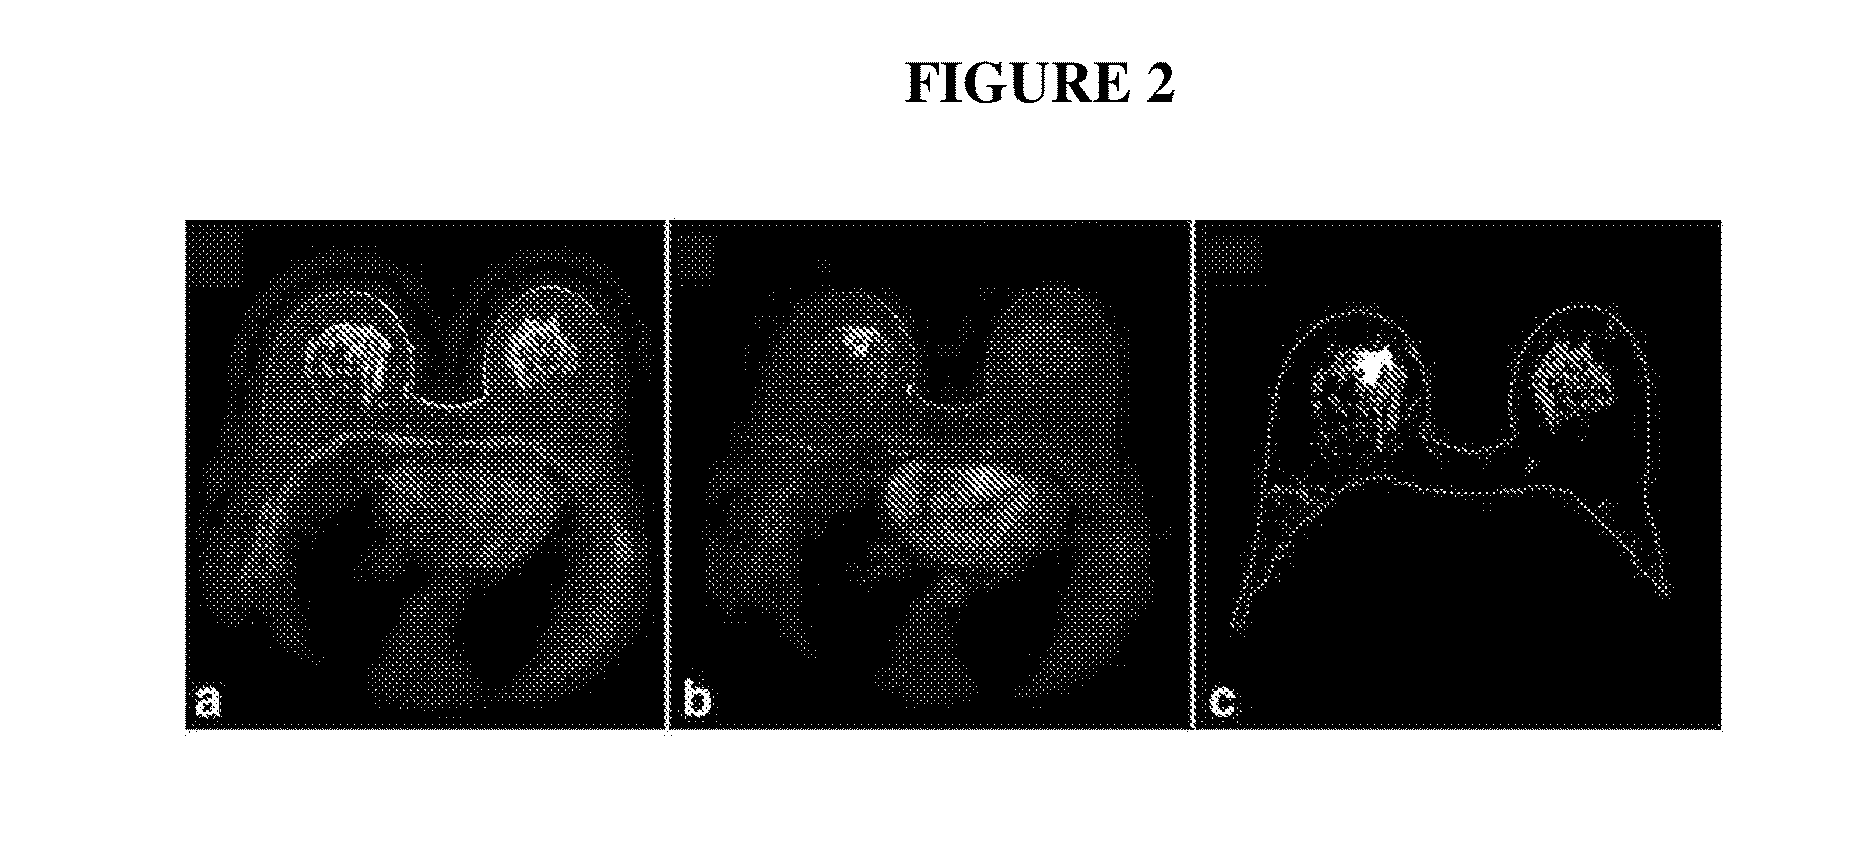 Systems and methods for extracting prognostic image features